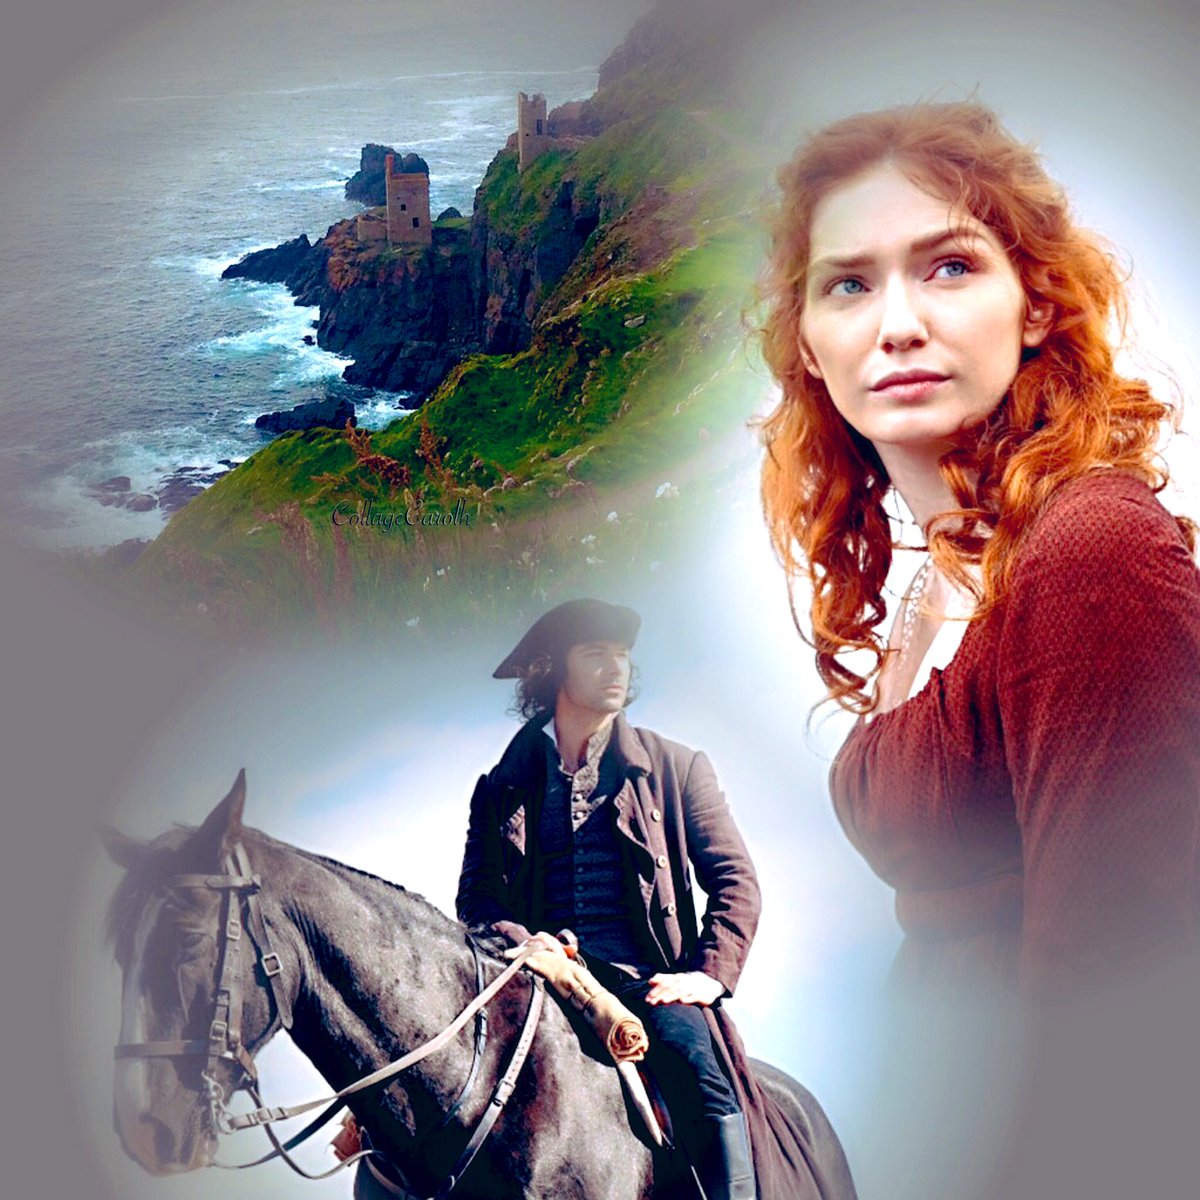 #PoldarkSunday..only 7 more sleeps to #Poldark #AidanTurner #EleanorTomlinson #beyondexcited..#AidanCrew. (Credit @FFASiteTweets for R & D pics..#Cornwall pic my own)..have a fabulous day!